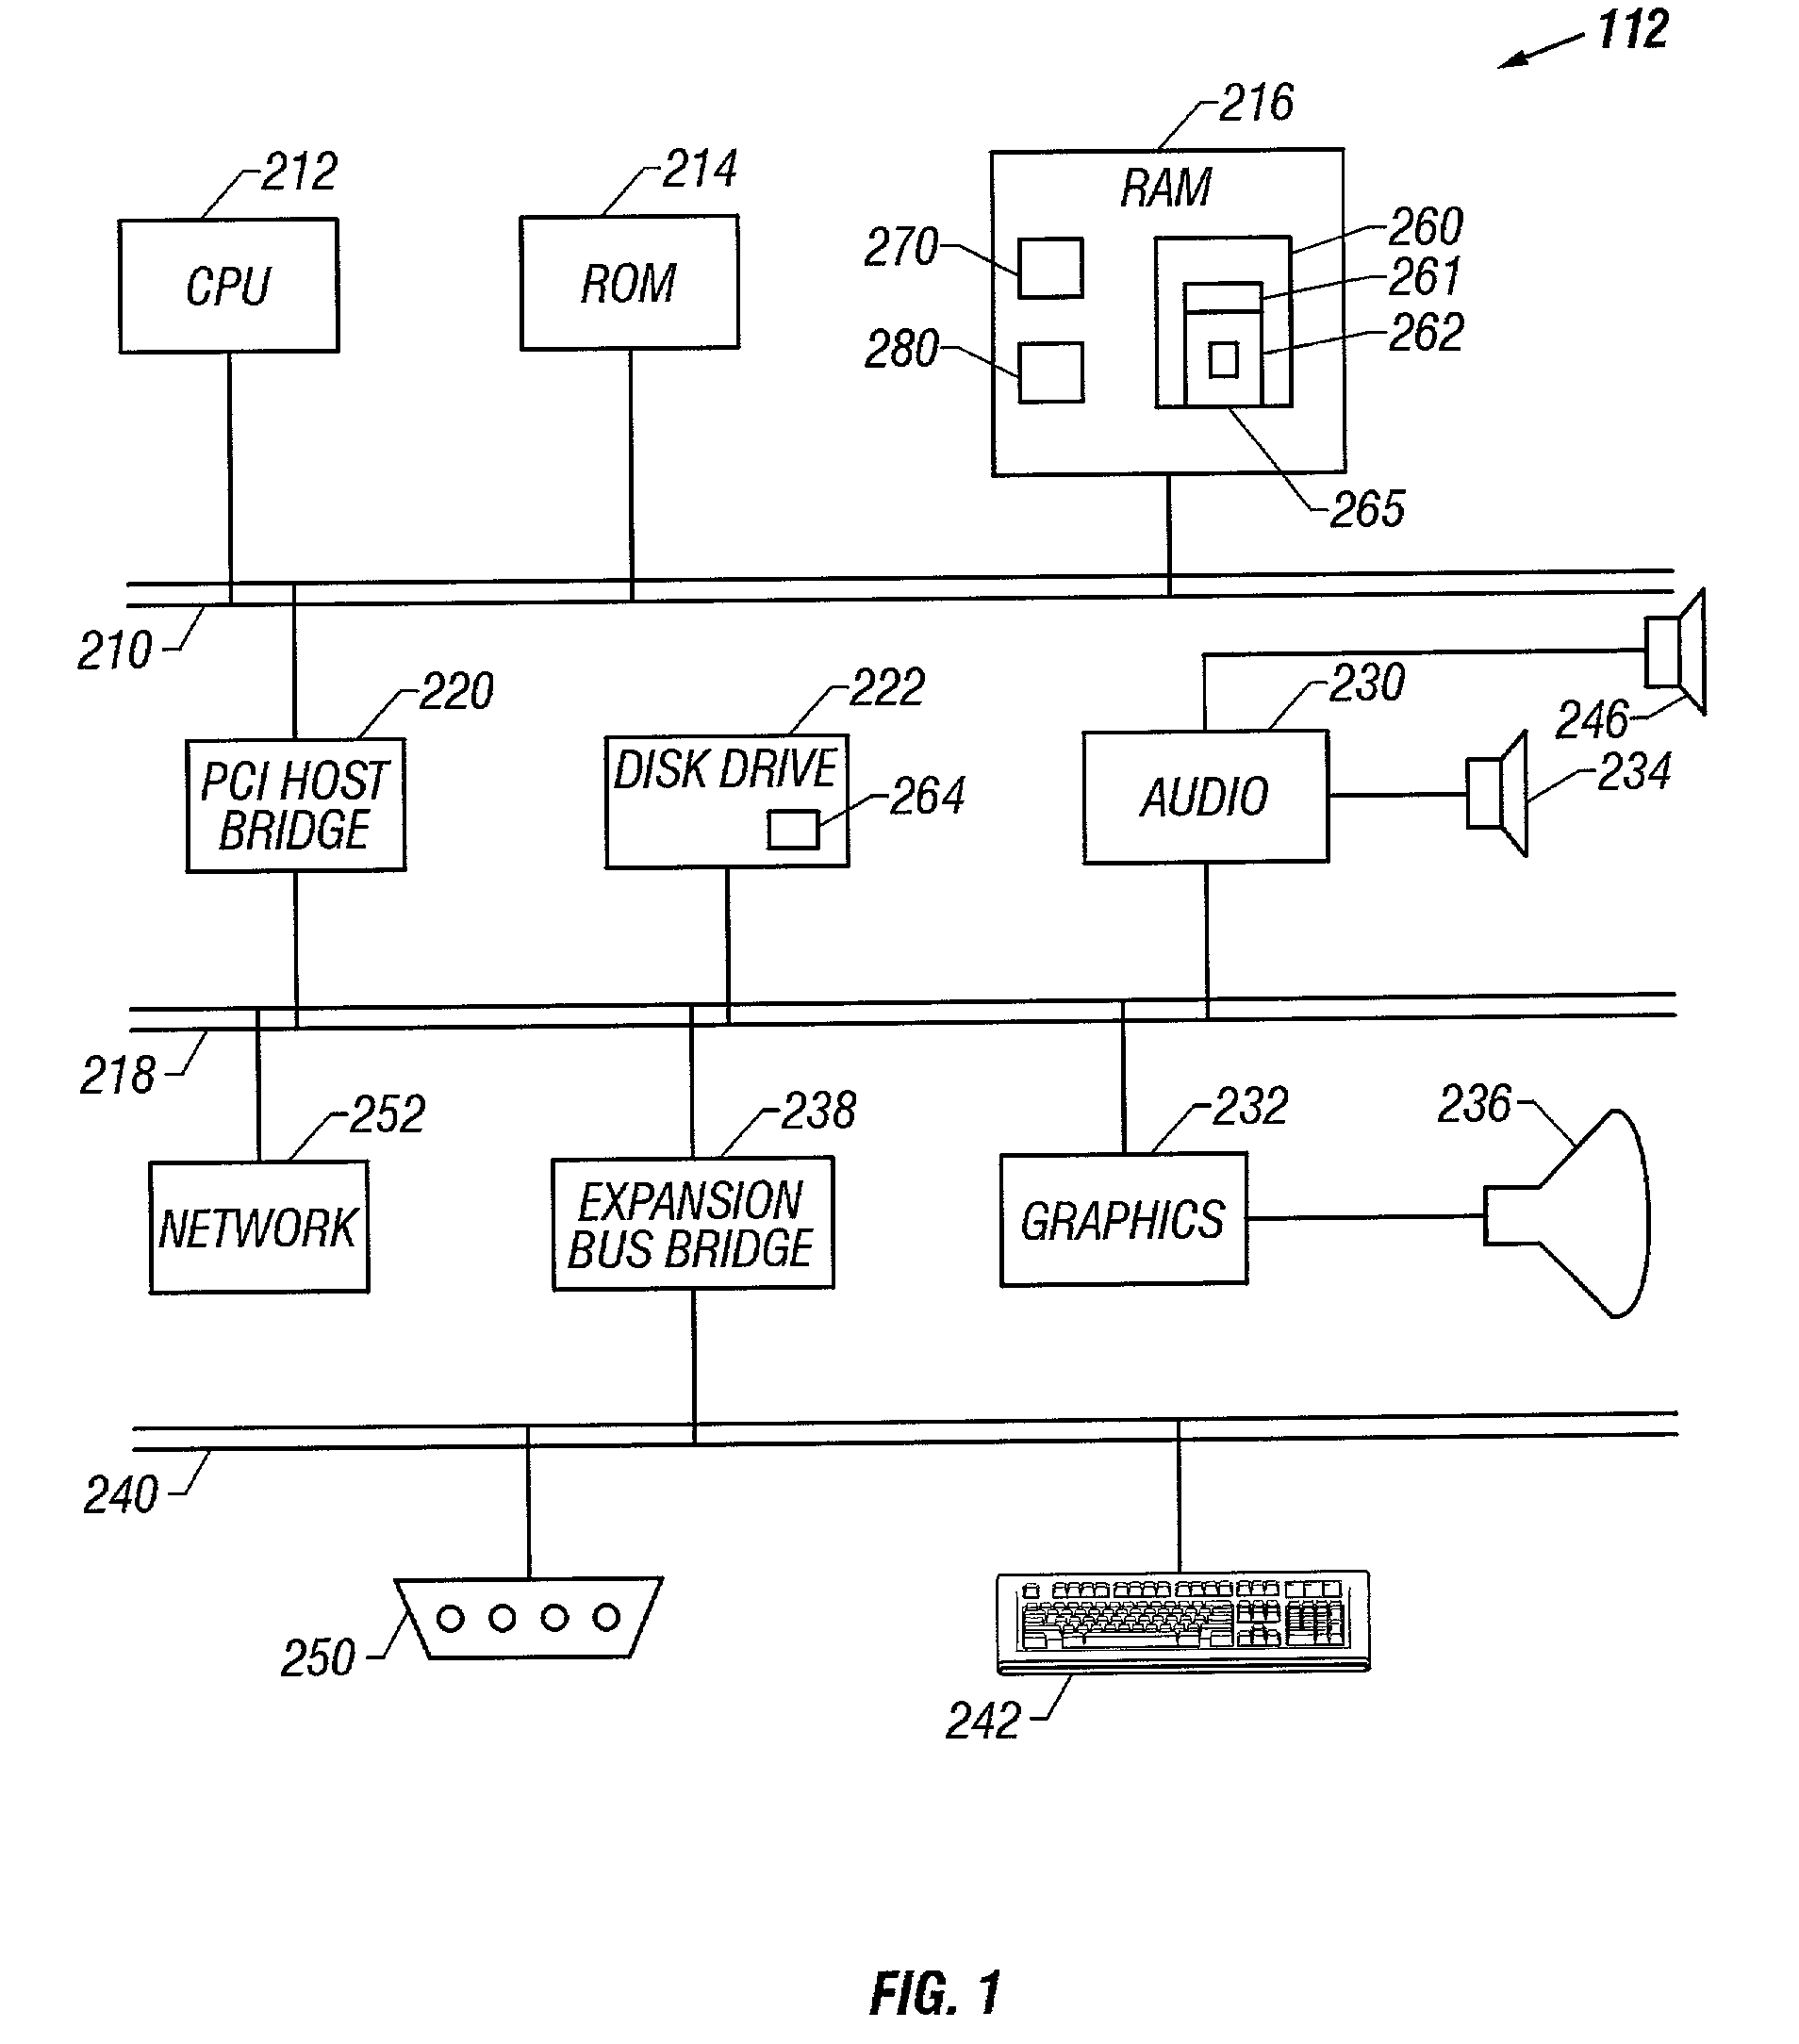 System and method for automatically adjusting merchandise pricing at a service-oriented interface terminal based upon the quantity of users present at the terminal